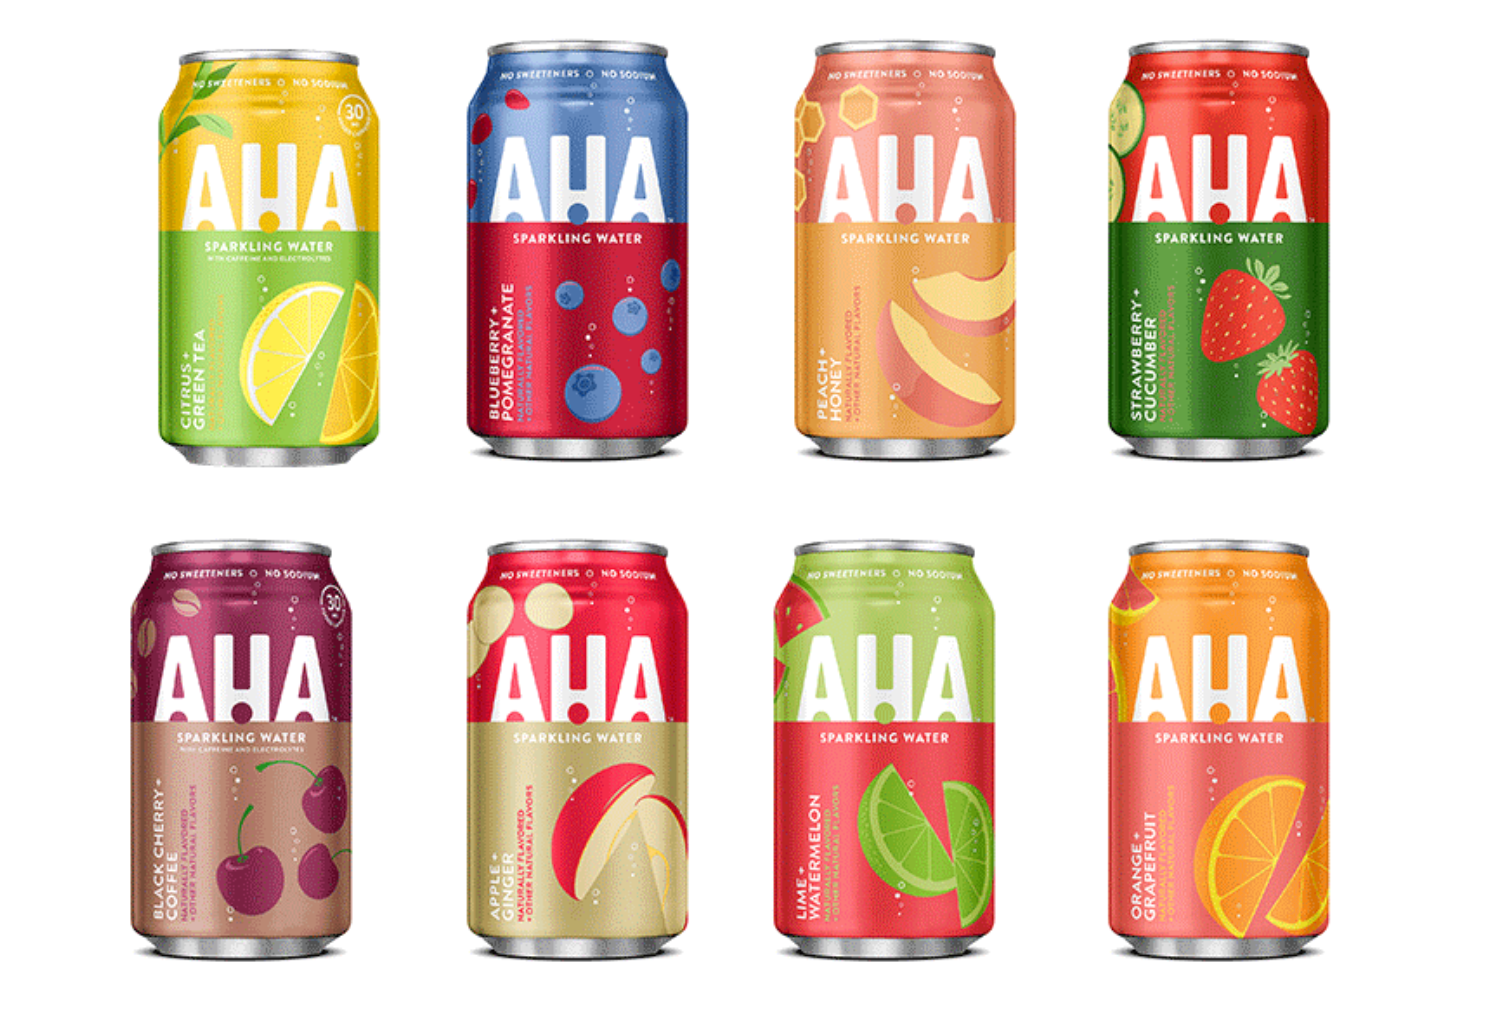 AHA flavored sparkling waters